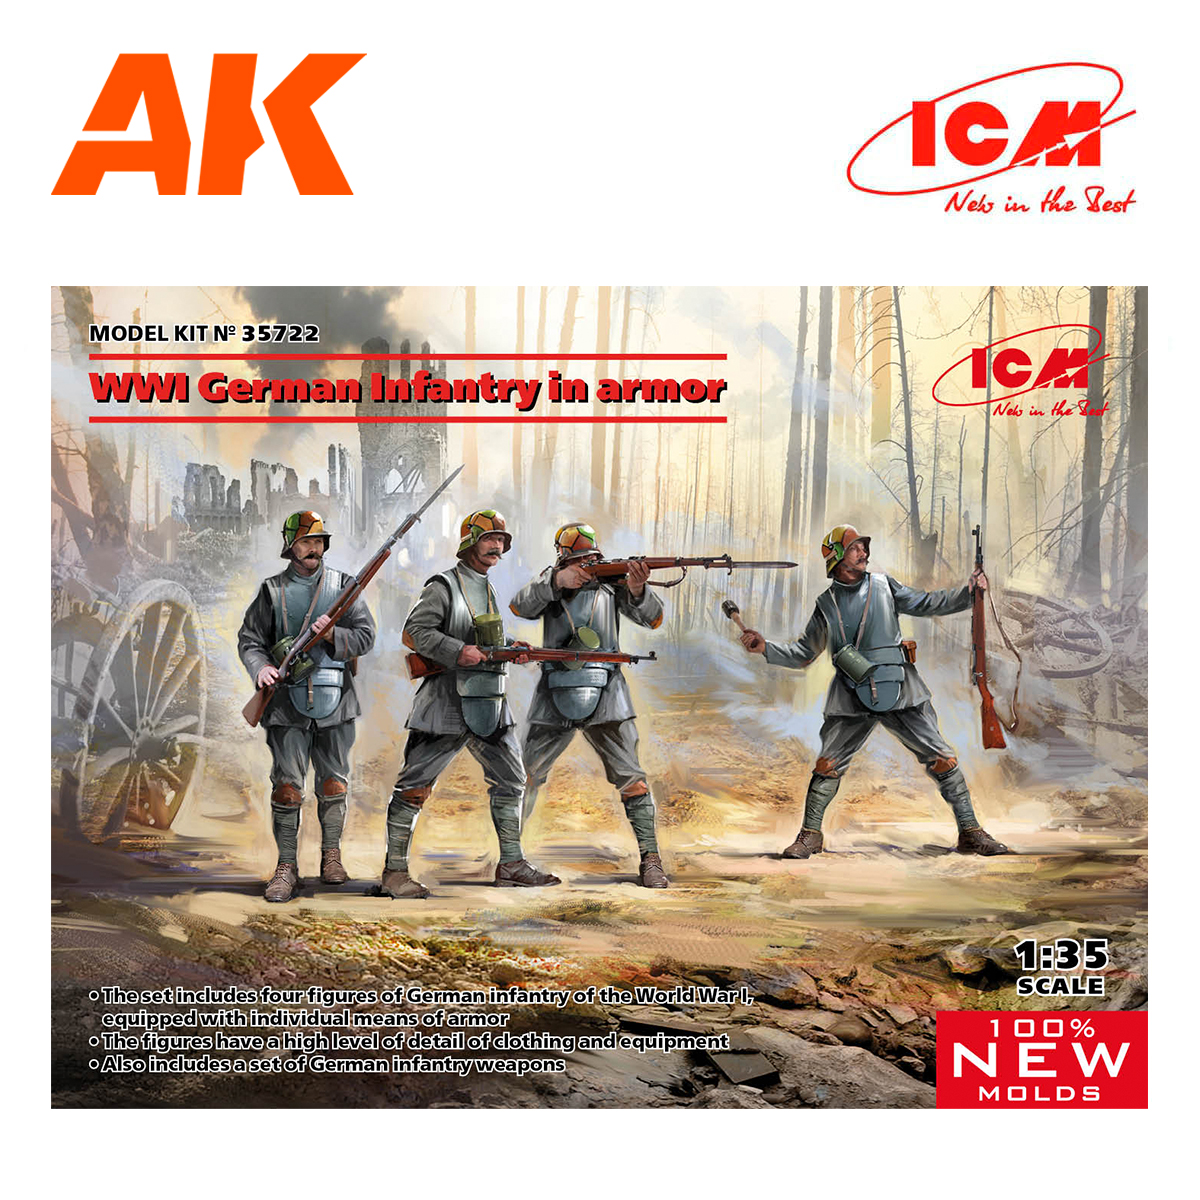 WWI German Infantry in аrmor (100% new molds) 1/35